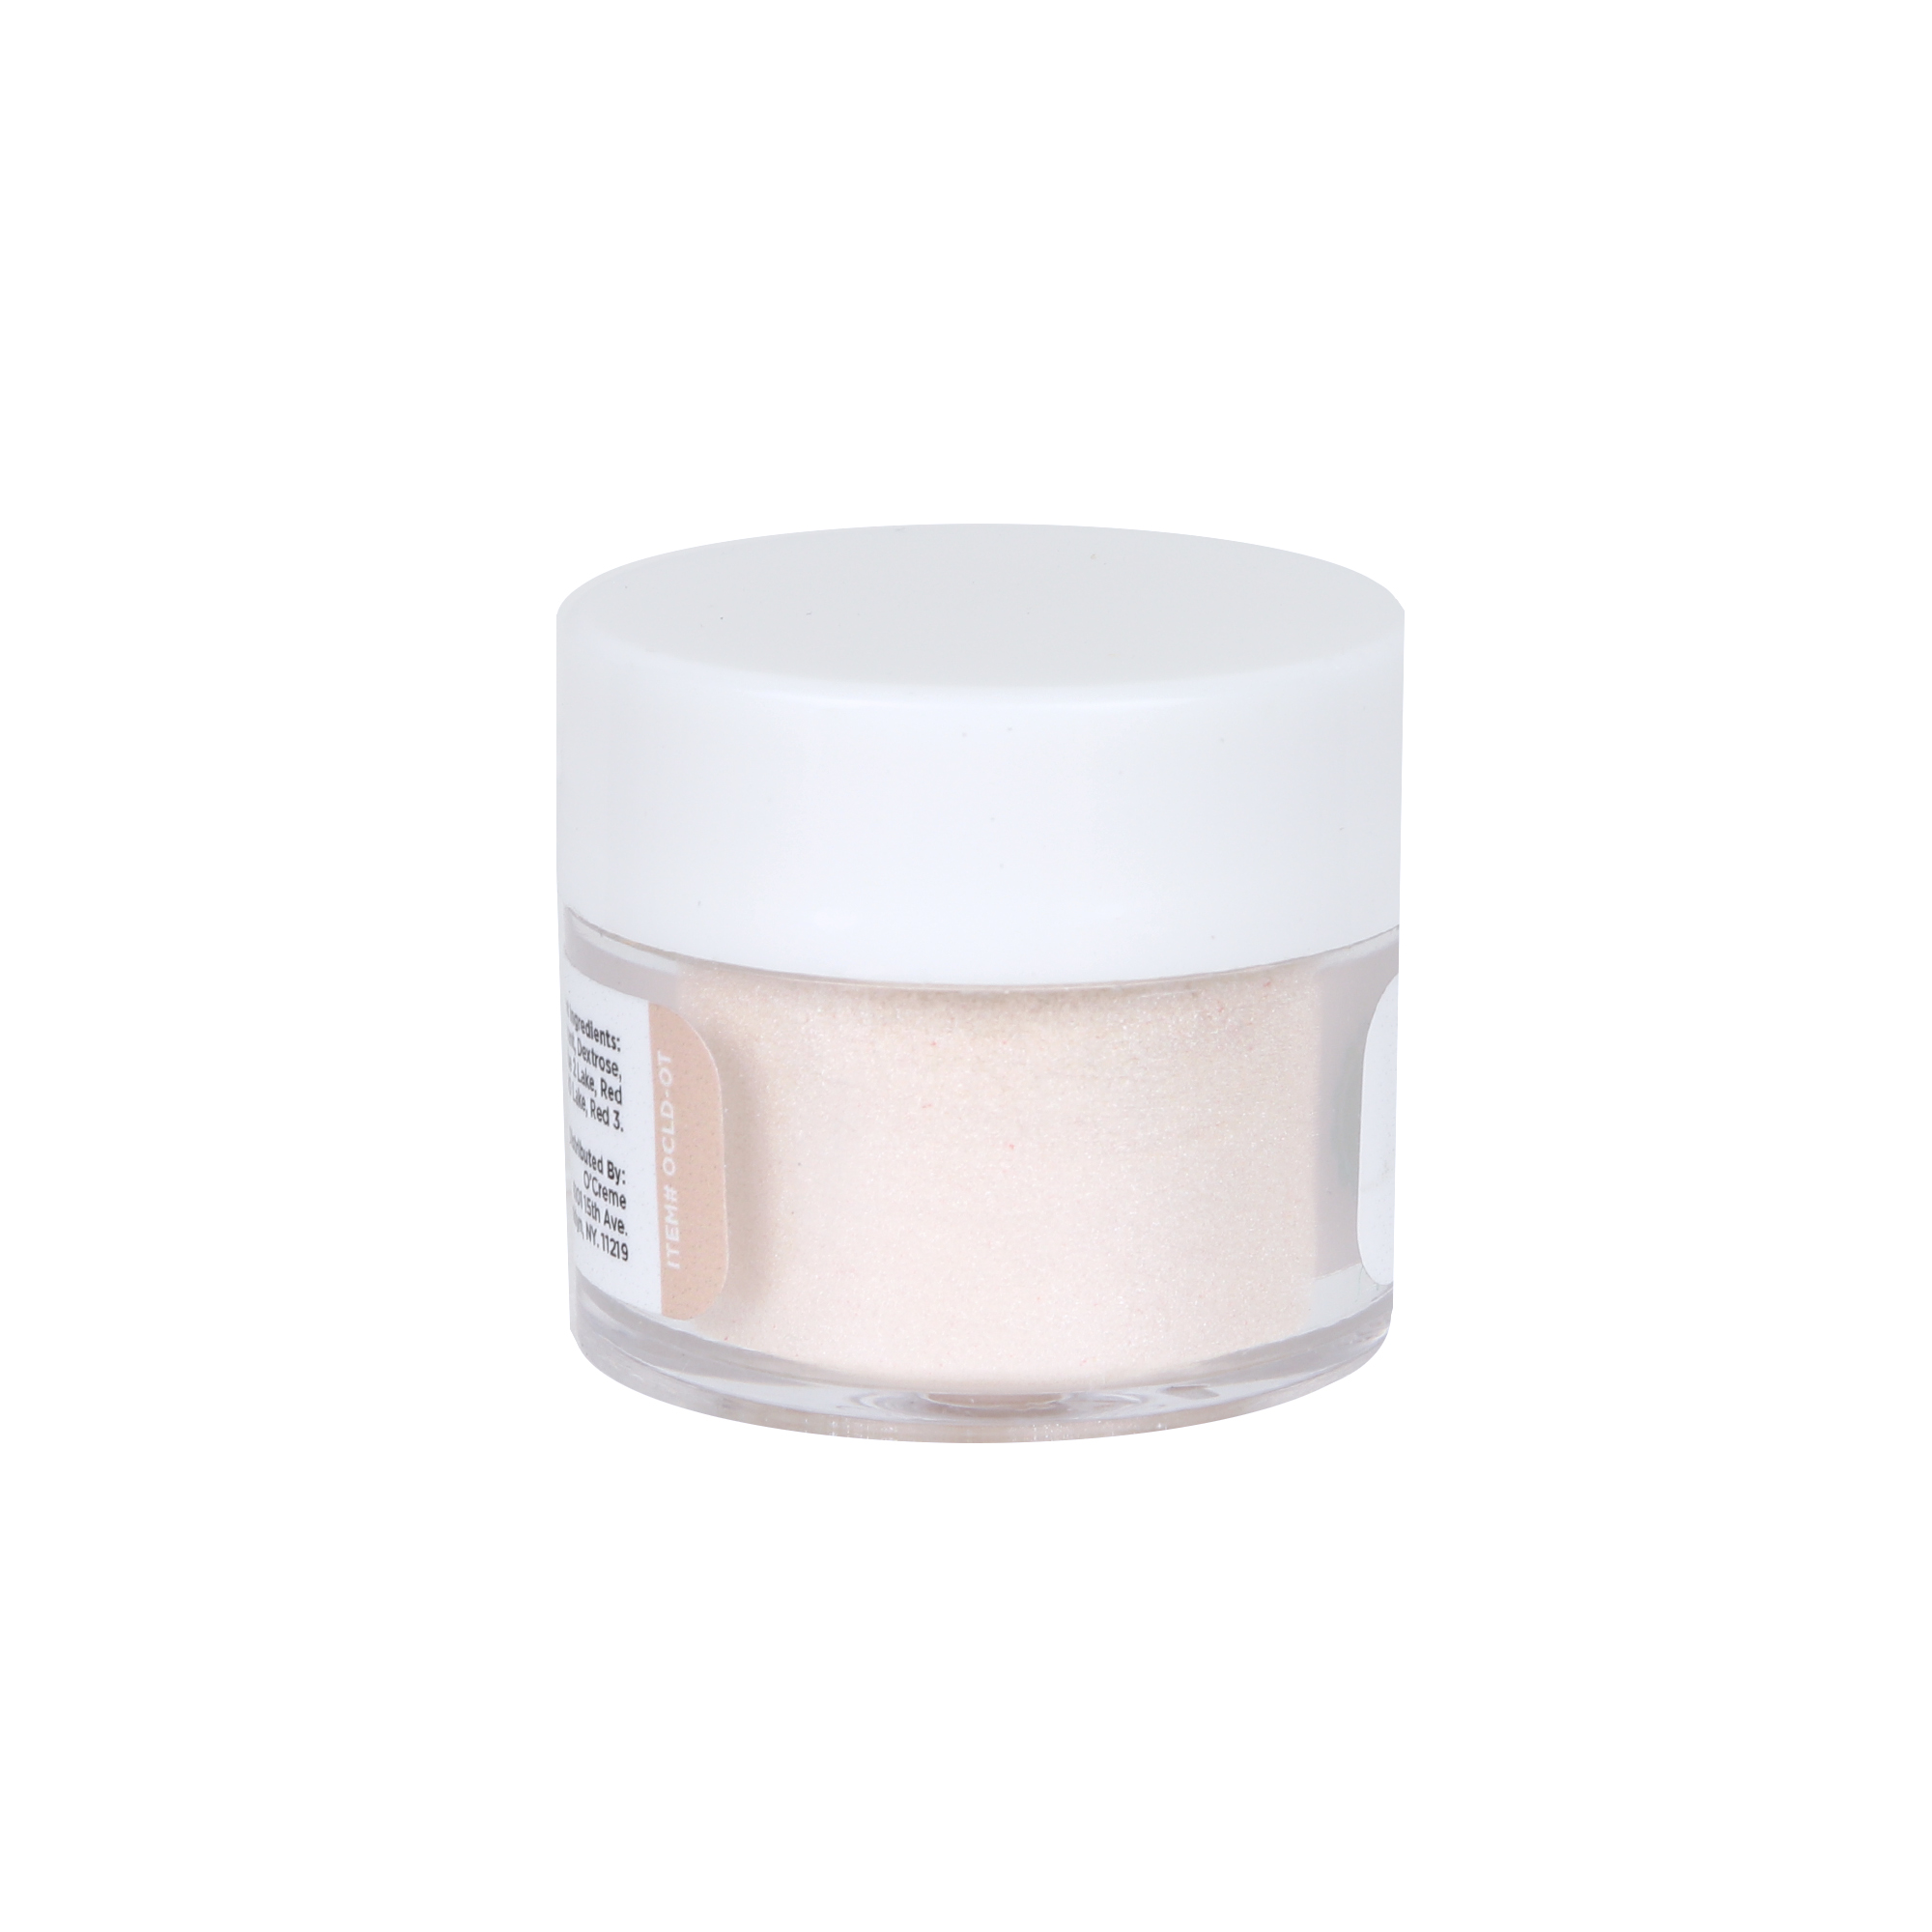 O'Creme Oyster Tan Luster Dust, 4 gr. image 2